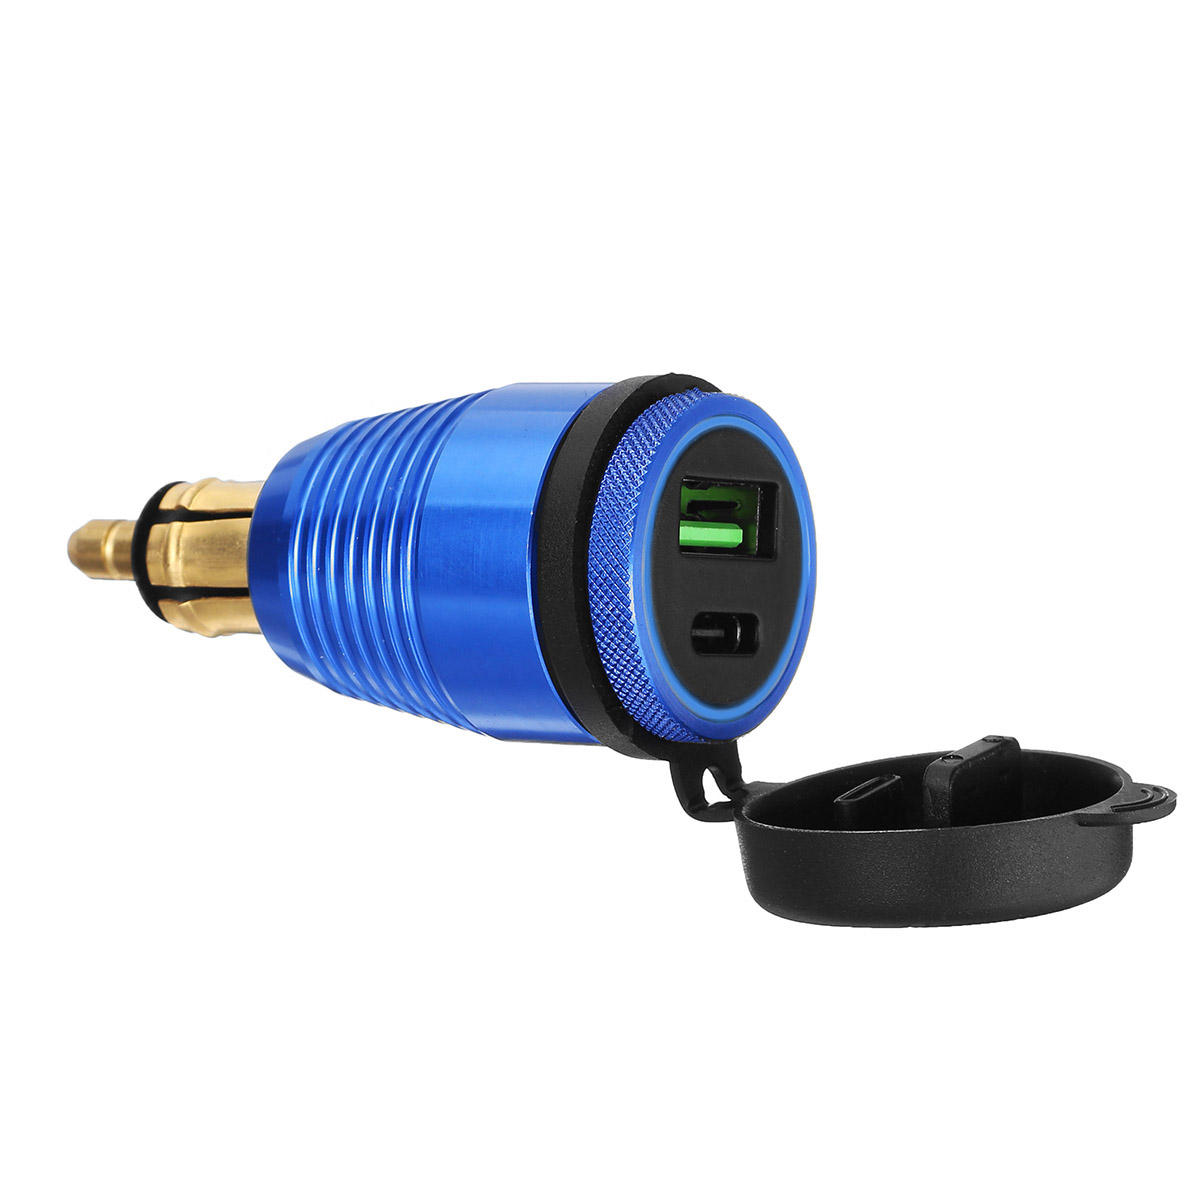 QC3.0 Type-C Waterproof General Quick USB Charger Socket Charger Blue Light